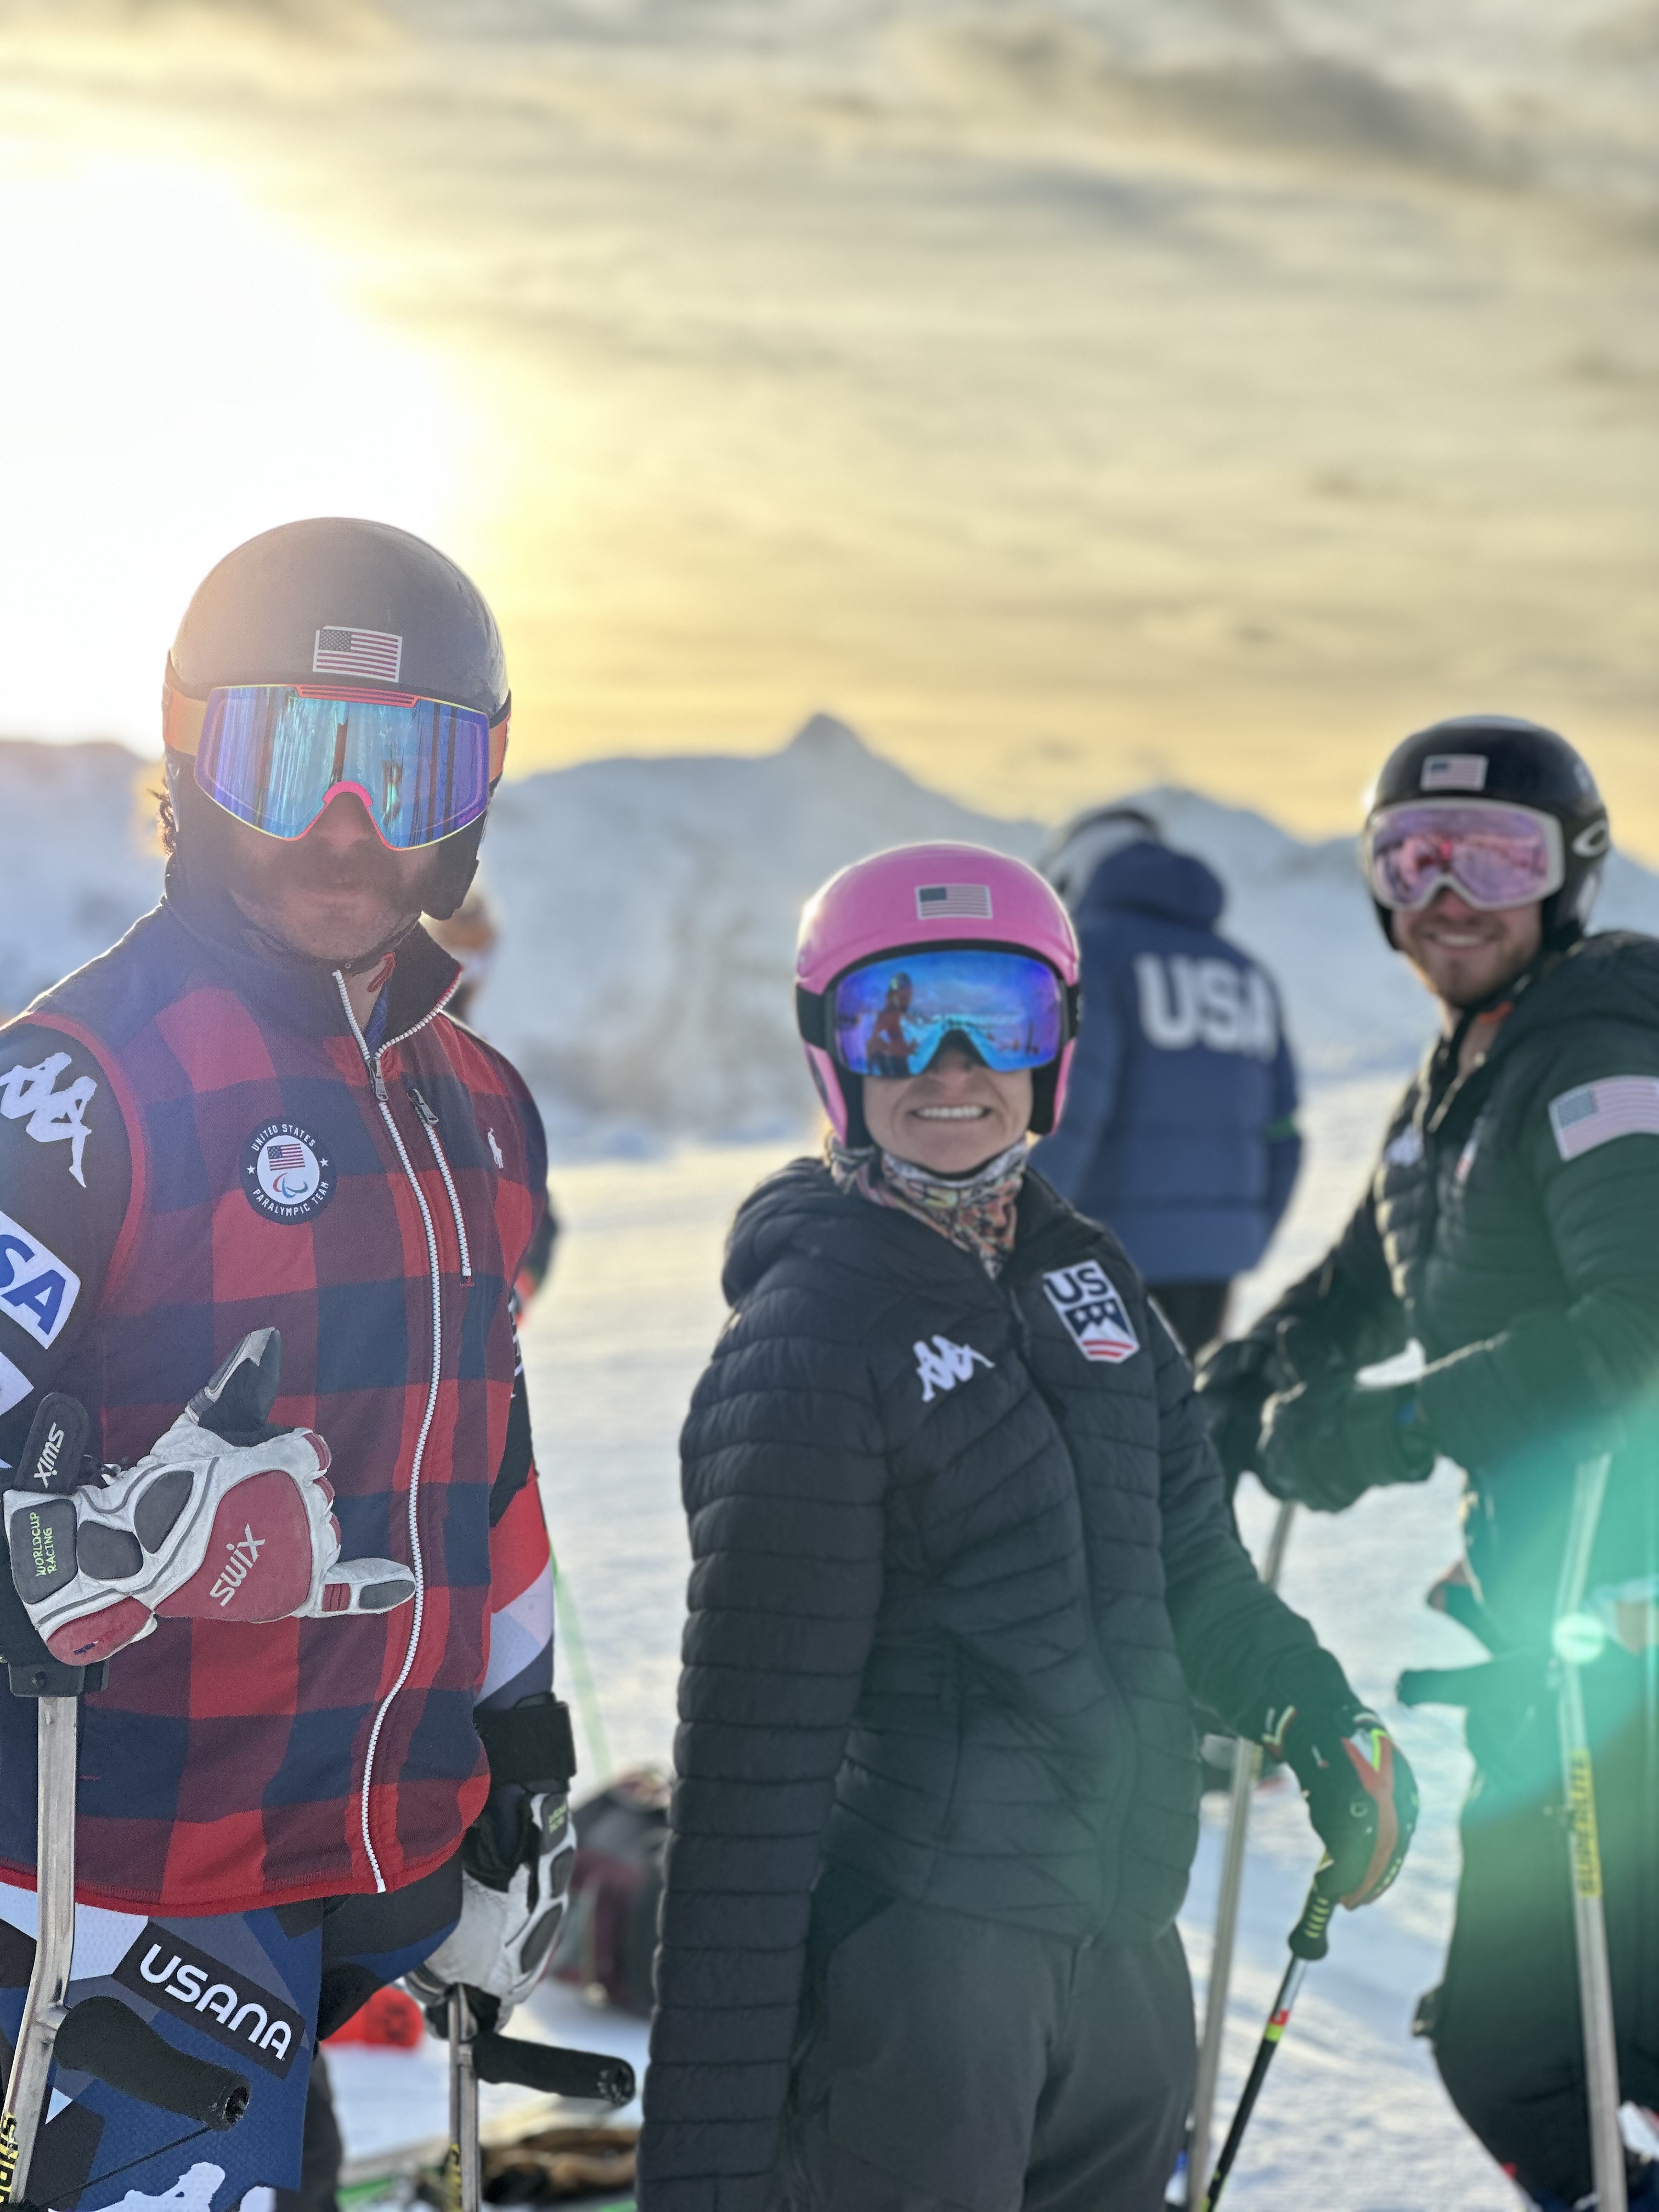 Patrick Halgren, Allie Johnson and Andrew Haraghey prior to the giant slalom event in Steinach am Brenner, Austria